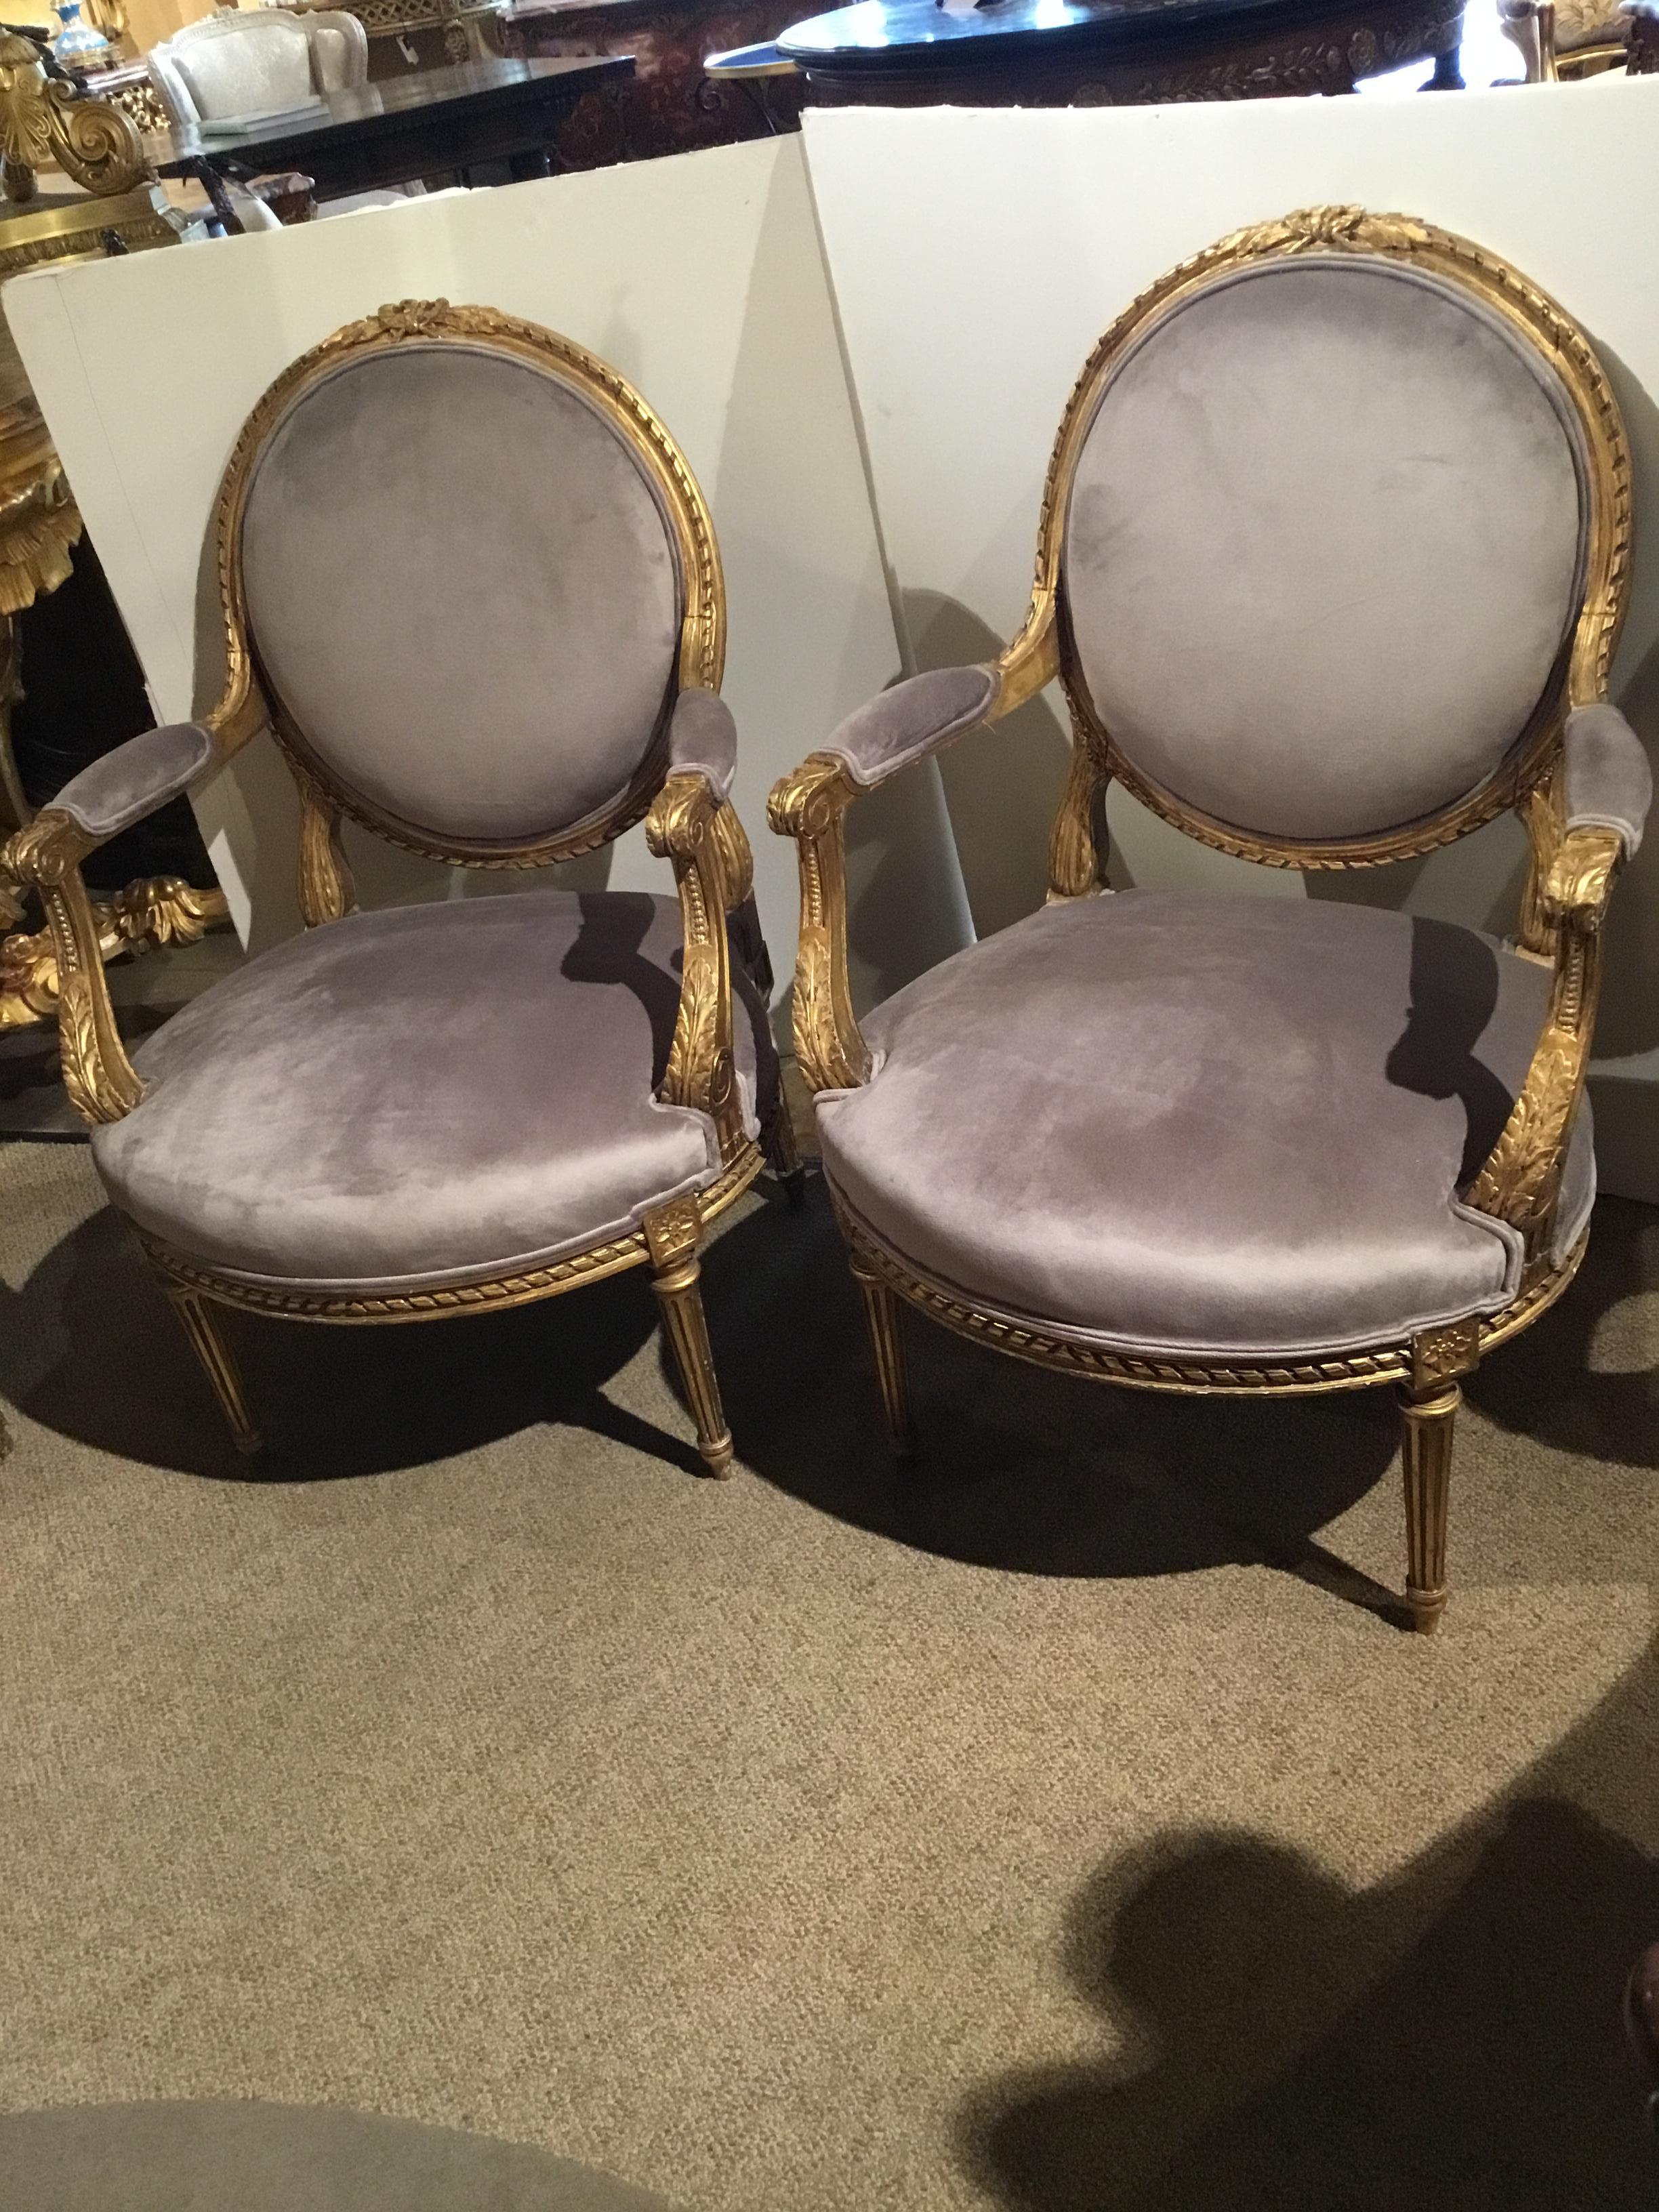 Oval back giltwood chairs with new designer fabric in gray hue.
Reeded legs and the backs are carved with a bow carving at the crest.
These chairs are sturdy and without problems.